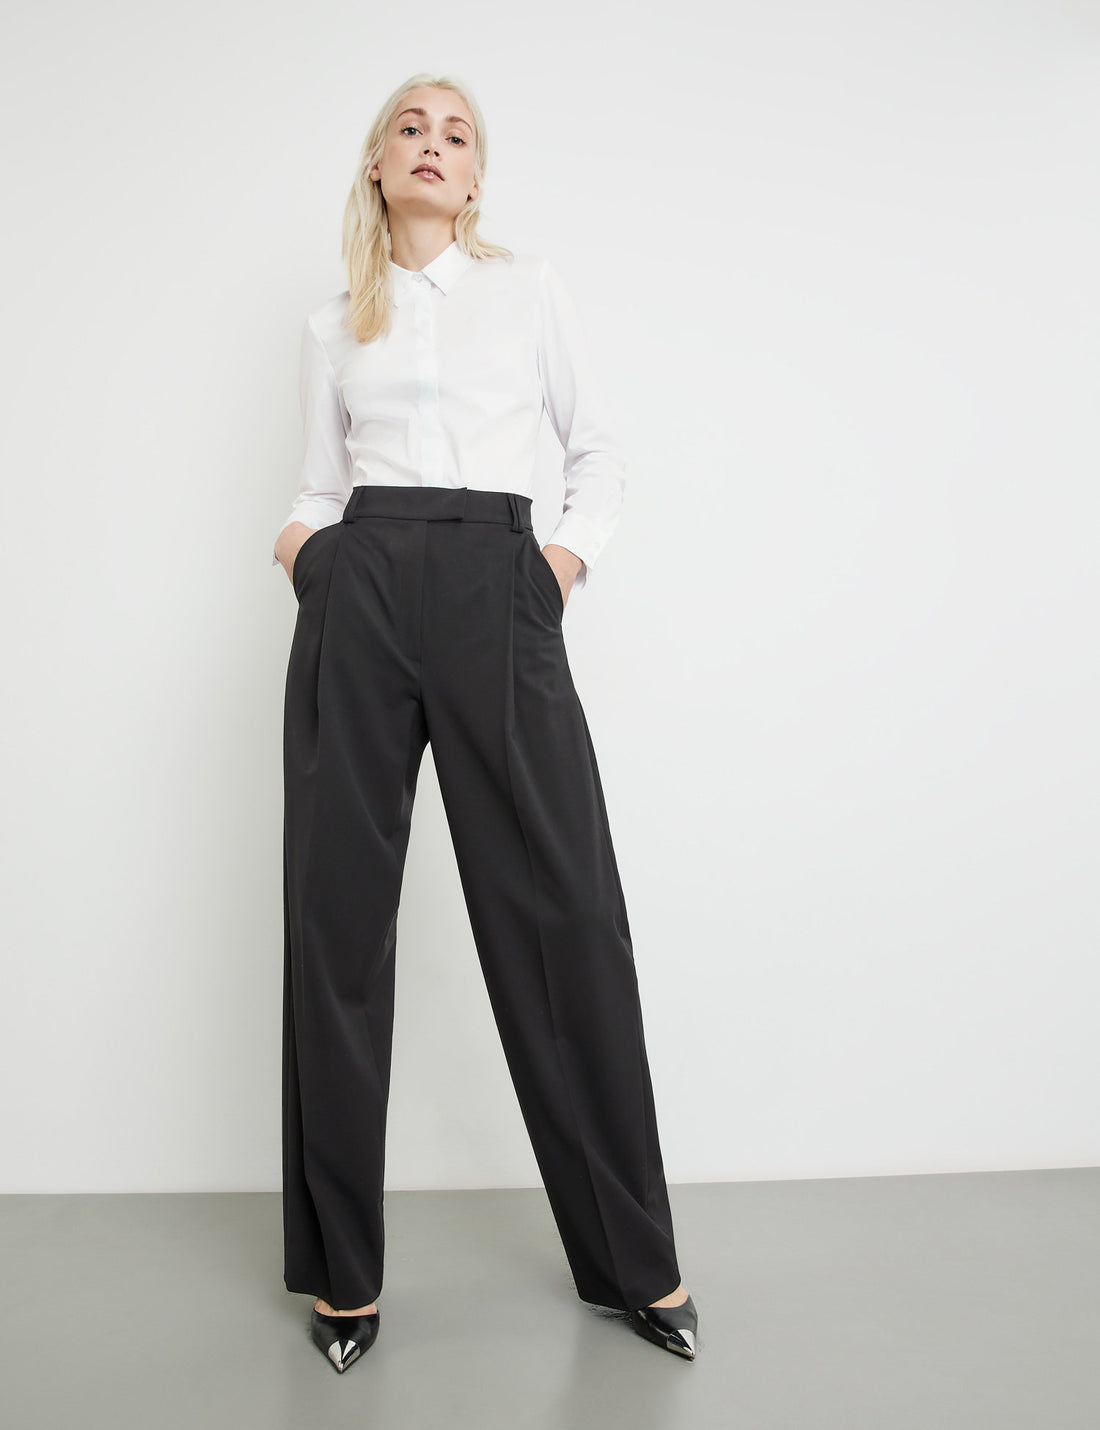 Elegant Trousers With A Wide Leg_920971-19800_1100_01